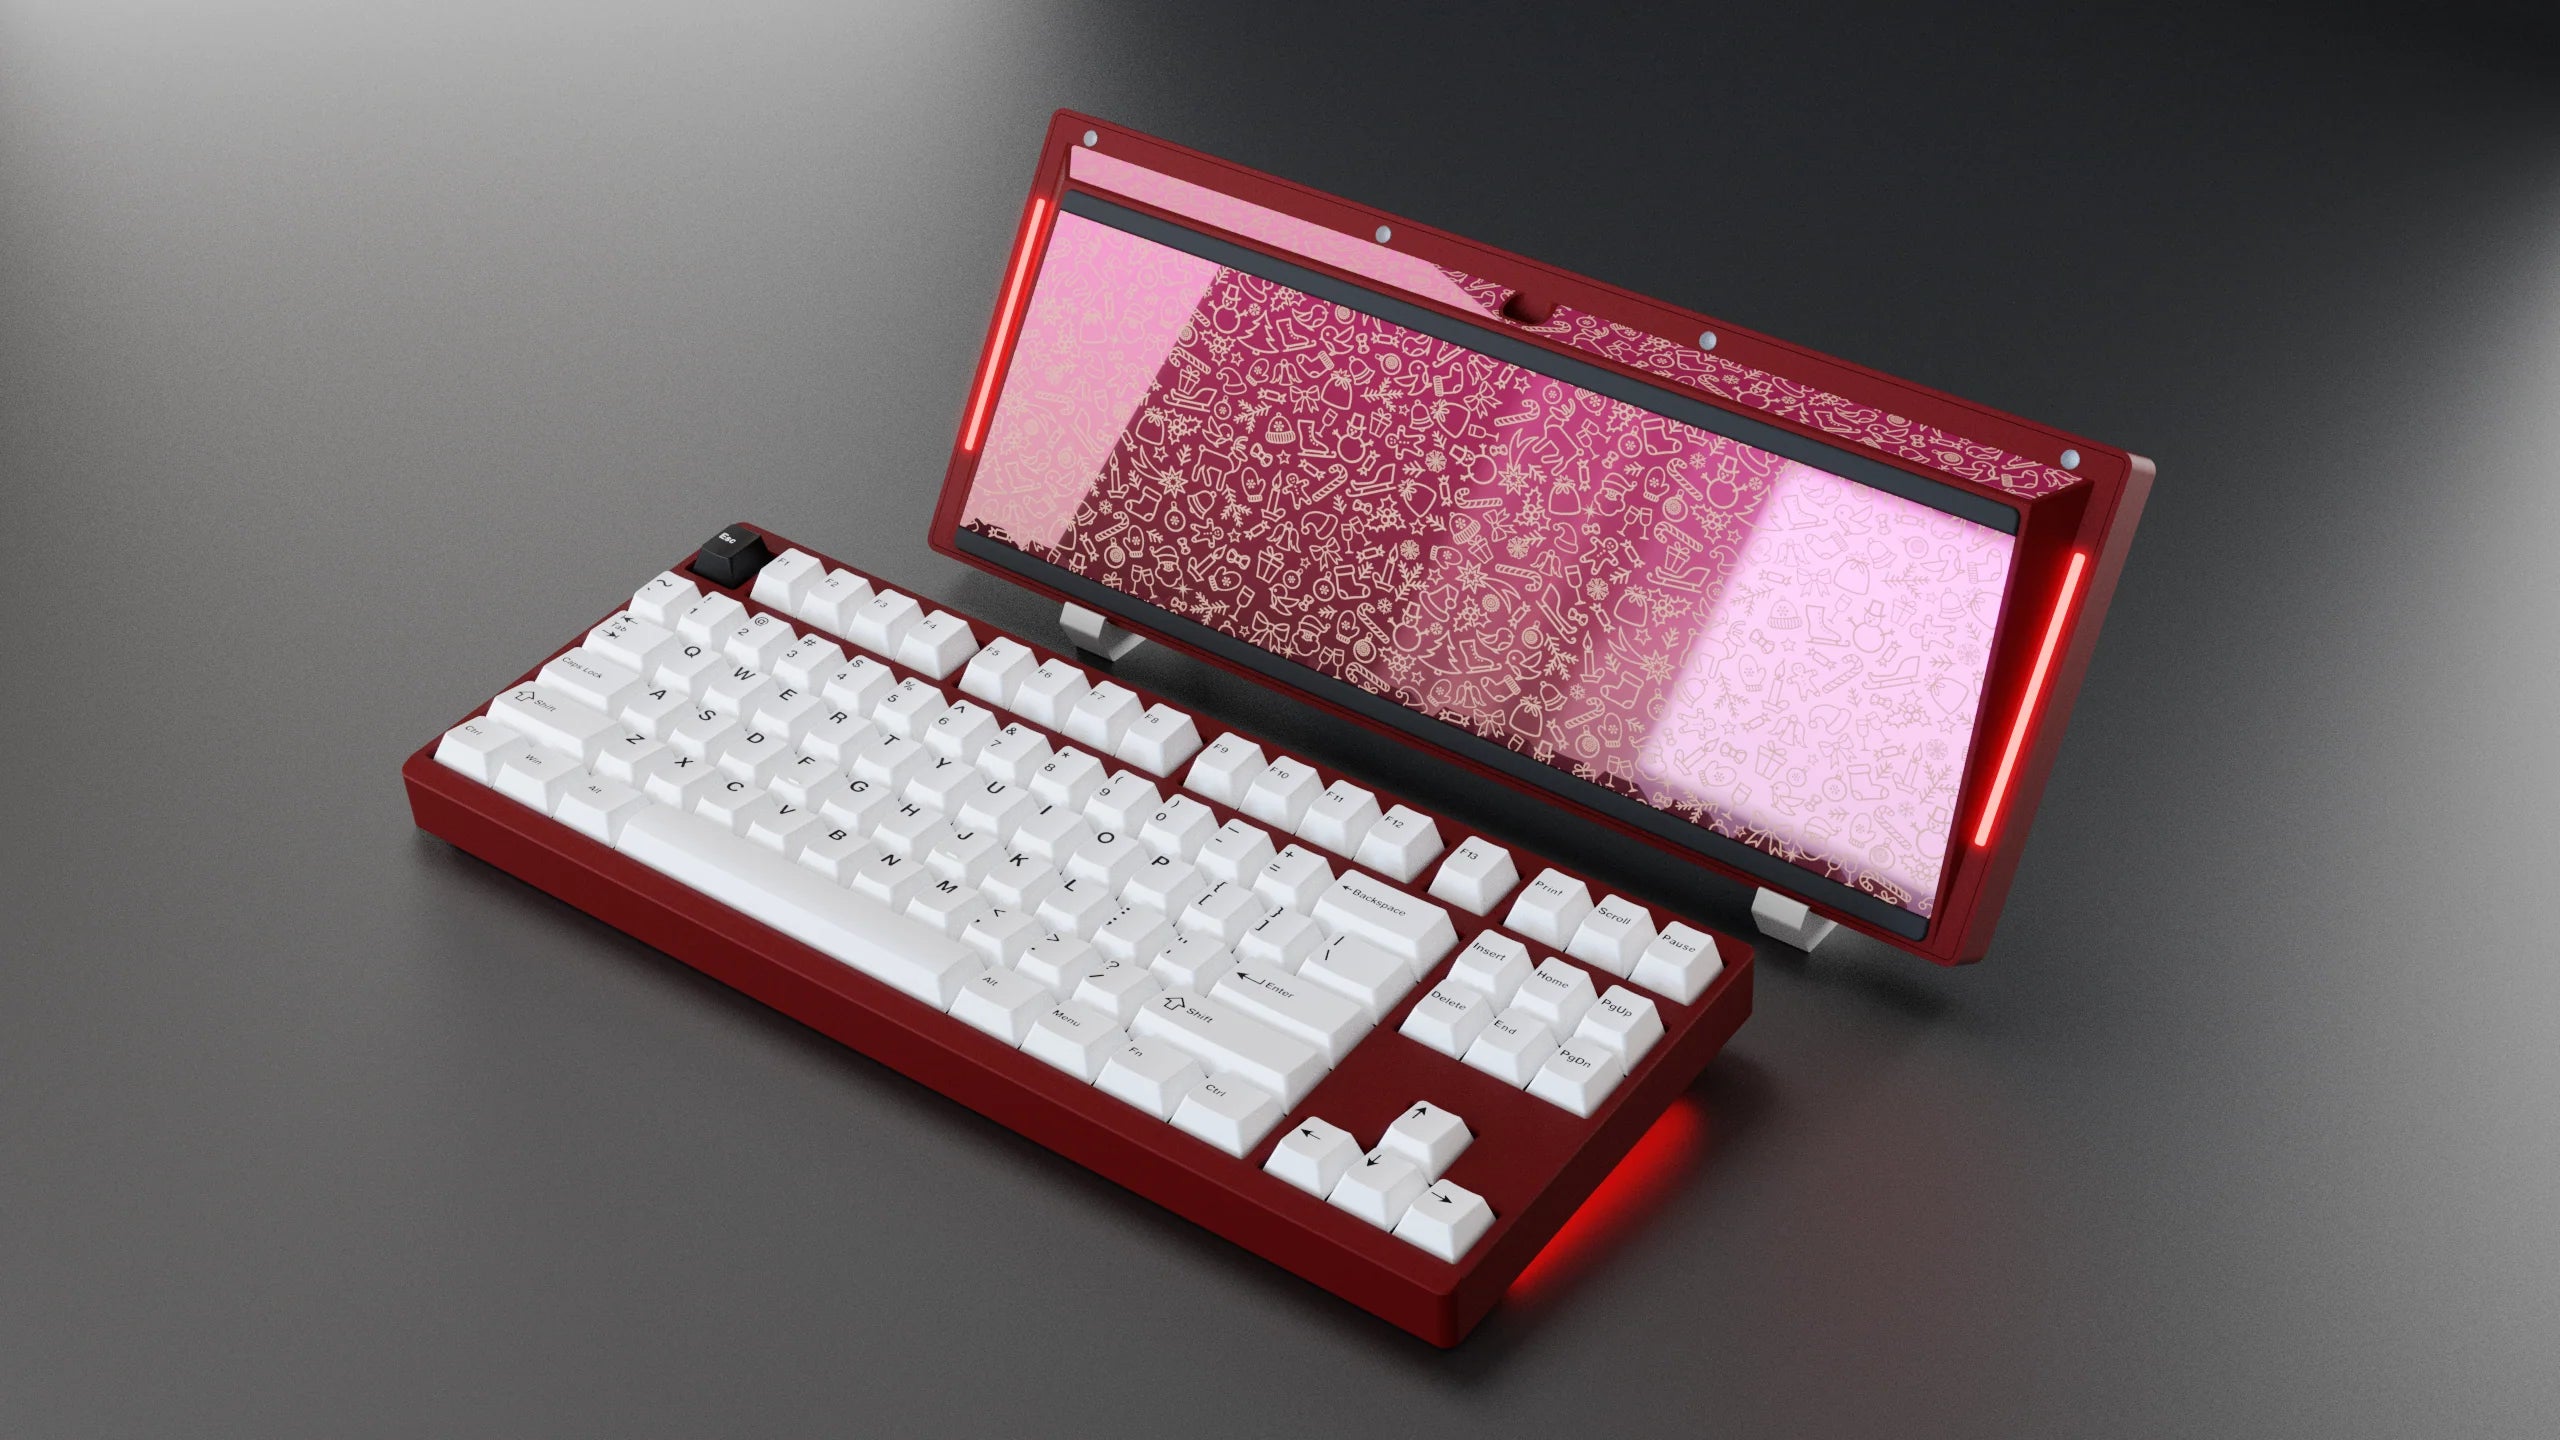 [PRE-ORDER] Zoom TKL EE by Meletrix - RED XMAS EDITION - KeebsForAll